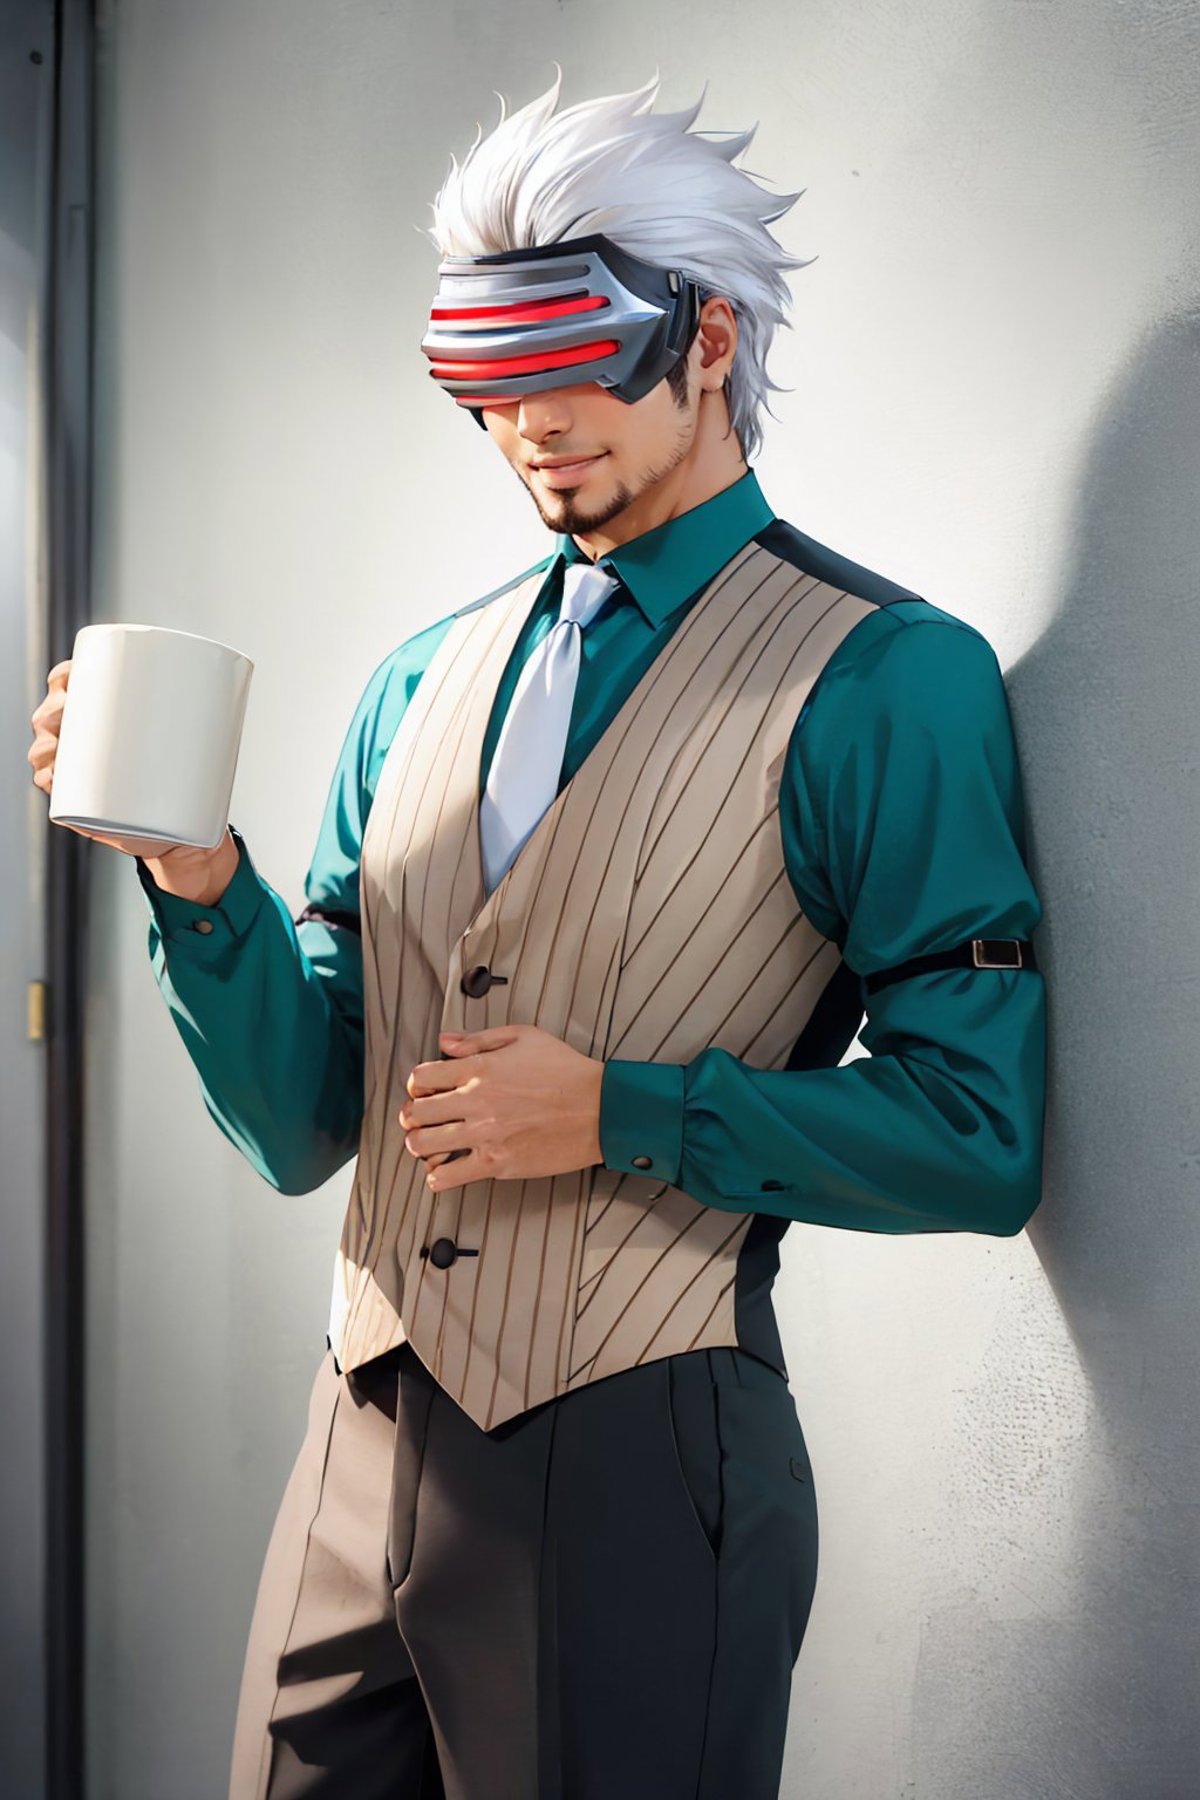 Godot | Ace Attorney: Trials & Tribulations image by justTNP